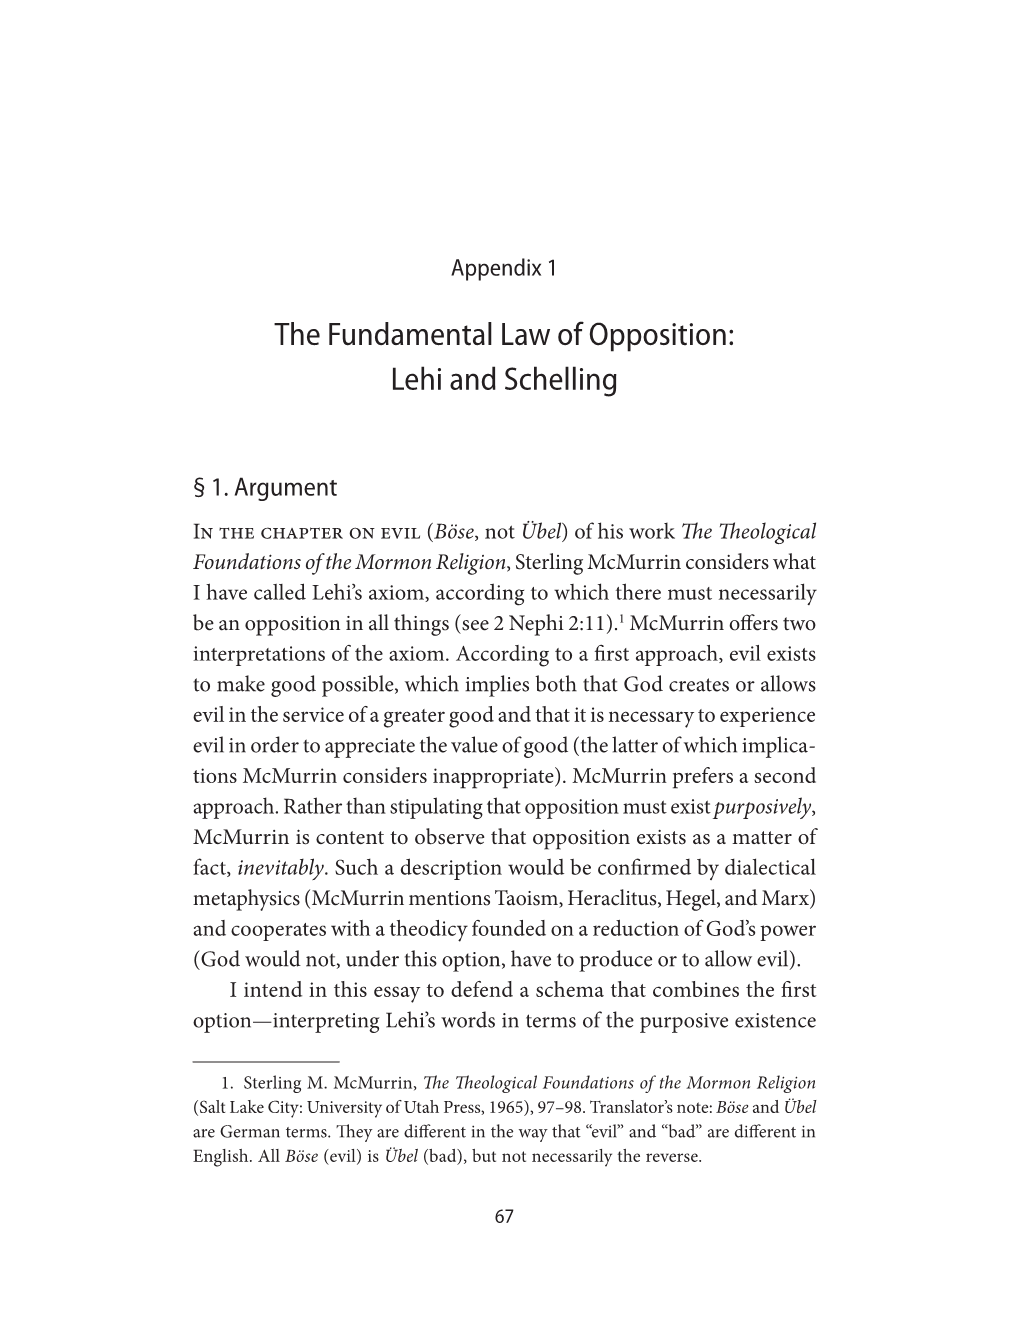 The Fundamental Law of Opposition: Lehi and Schelling